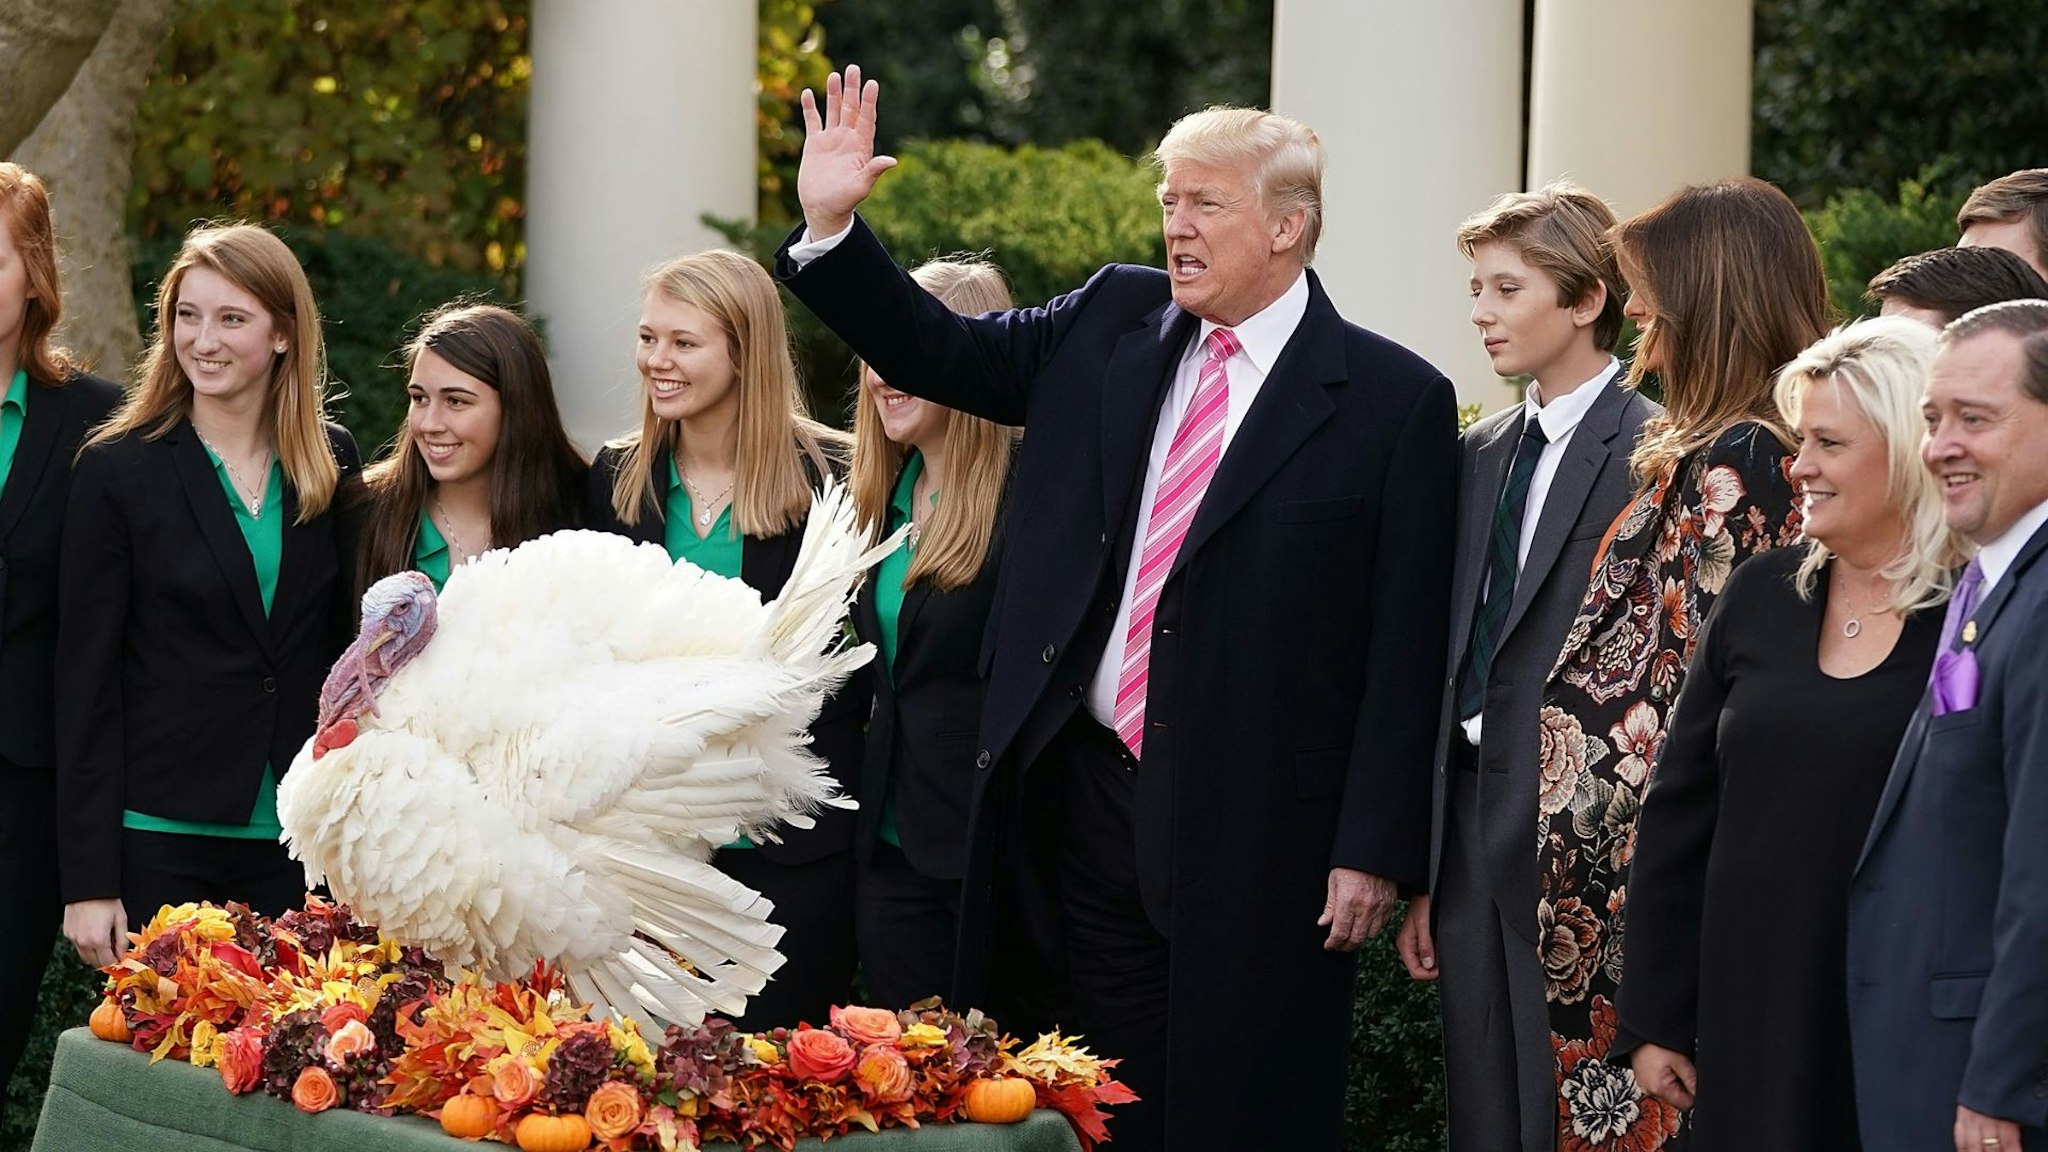 WASHINGTON, DC - NOVEMBER 21: U.S. President Donald Trump (C), first lady Melania Trump, their son Barron, National Turkey Federation Chairman Carl Wittenburg and his family and members of the Draper County, Minnesota, 4-H chapater pose for photographs after Trump pardoned, Drumstick, the National Thanksgiving Turkey in the Rose Garden at the White House November 21, 2017 in Washington, DC. Following the presidential pardon, the 40-pound White Holland breed which was raised by Wittenburg in Minnesota, will then reside at his new home, 'Gobbler's Rest,' at Virginia Tech.